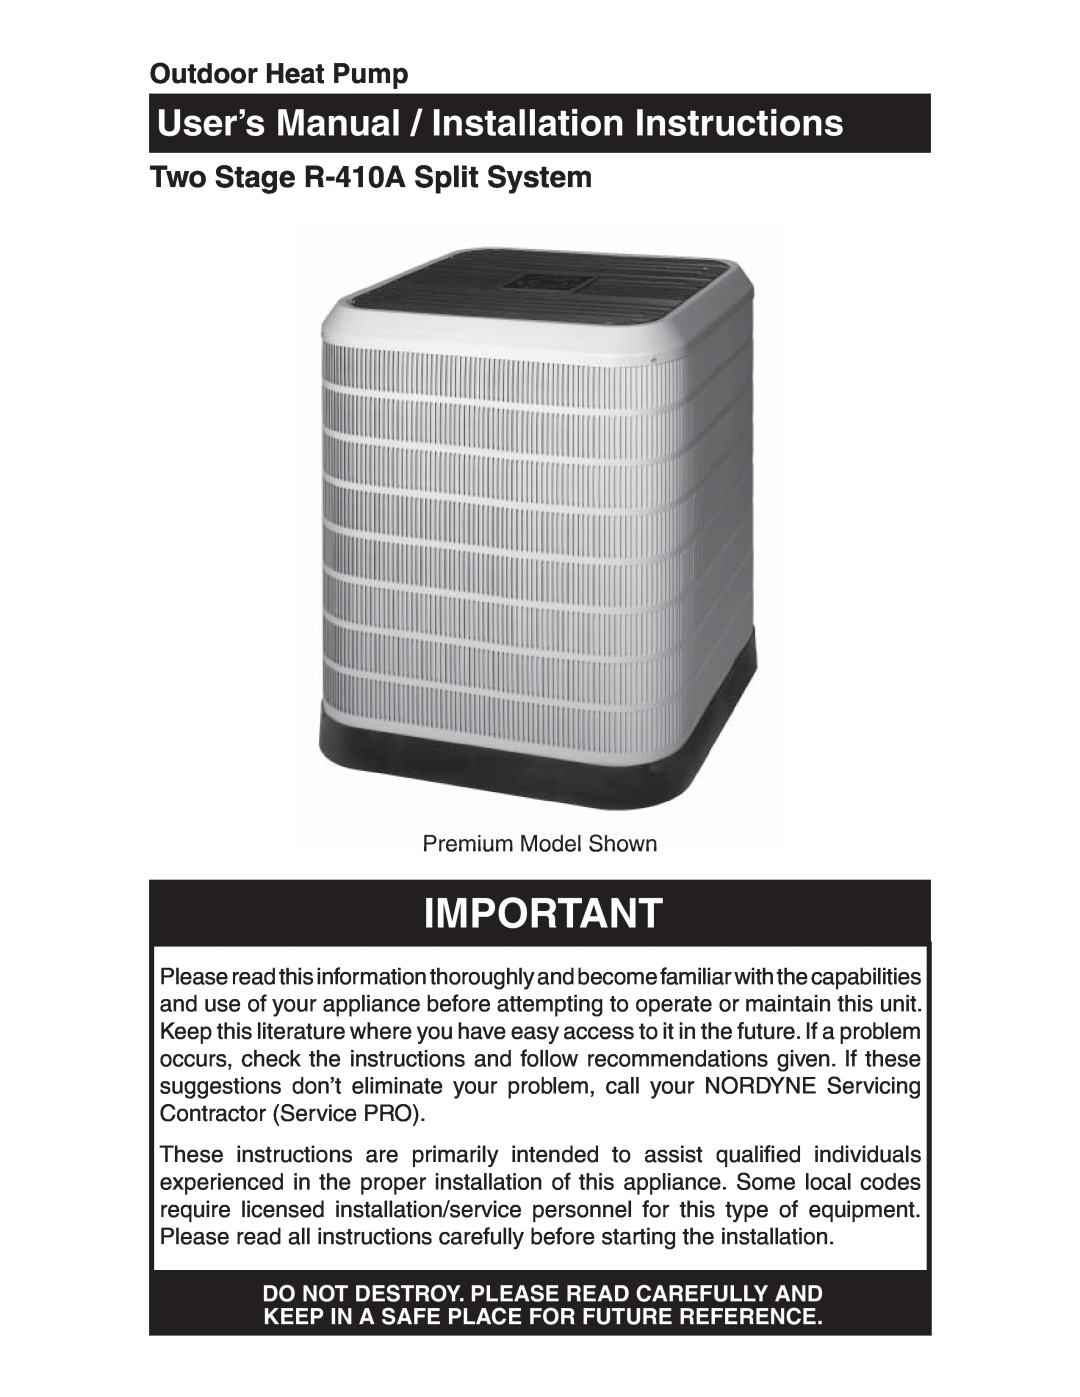 Nordyne R-410A installation instructions Heat Pump Principle of Operation, Winter Heating, Summer Cooling 